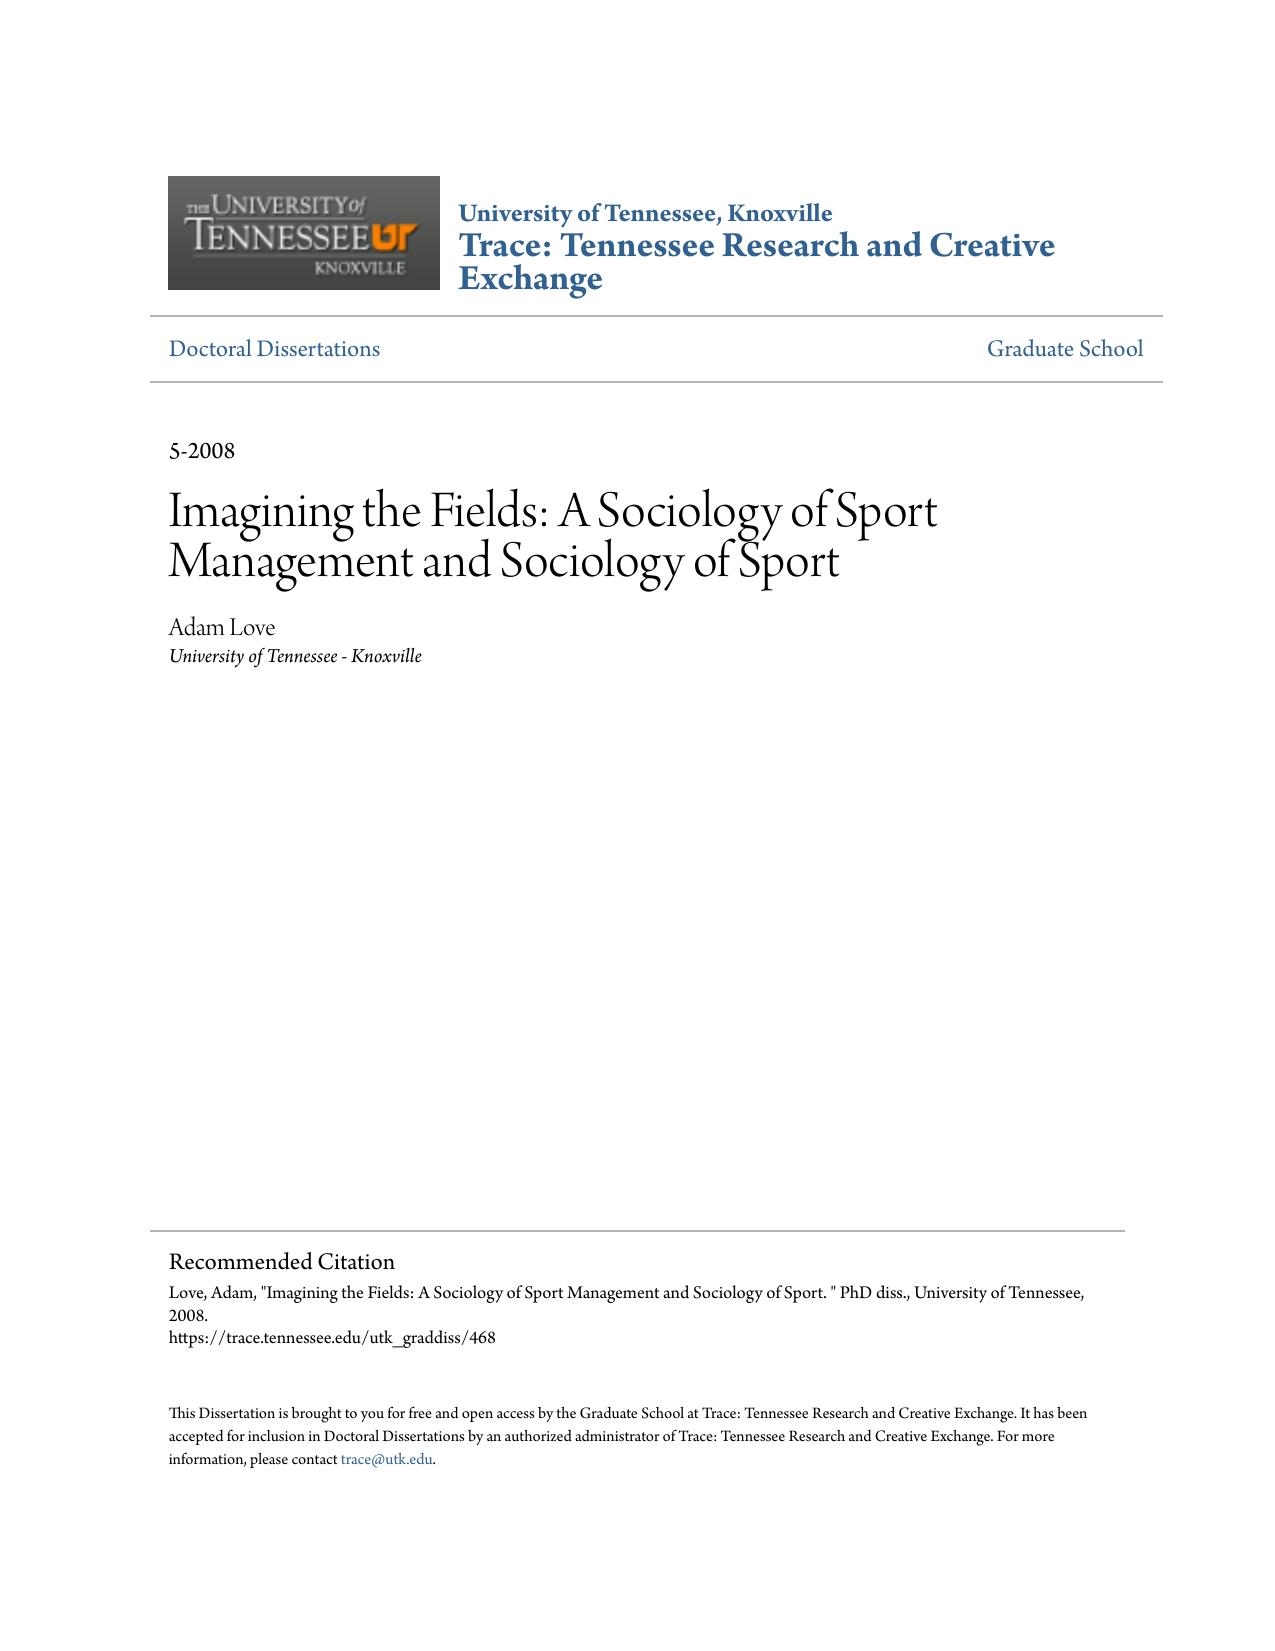 Imagining the Fields: A Sociology of Sport Management and Sociology of Sport